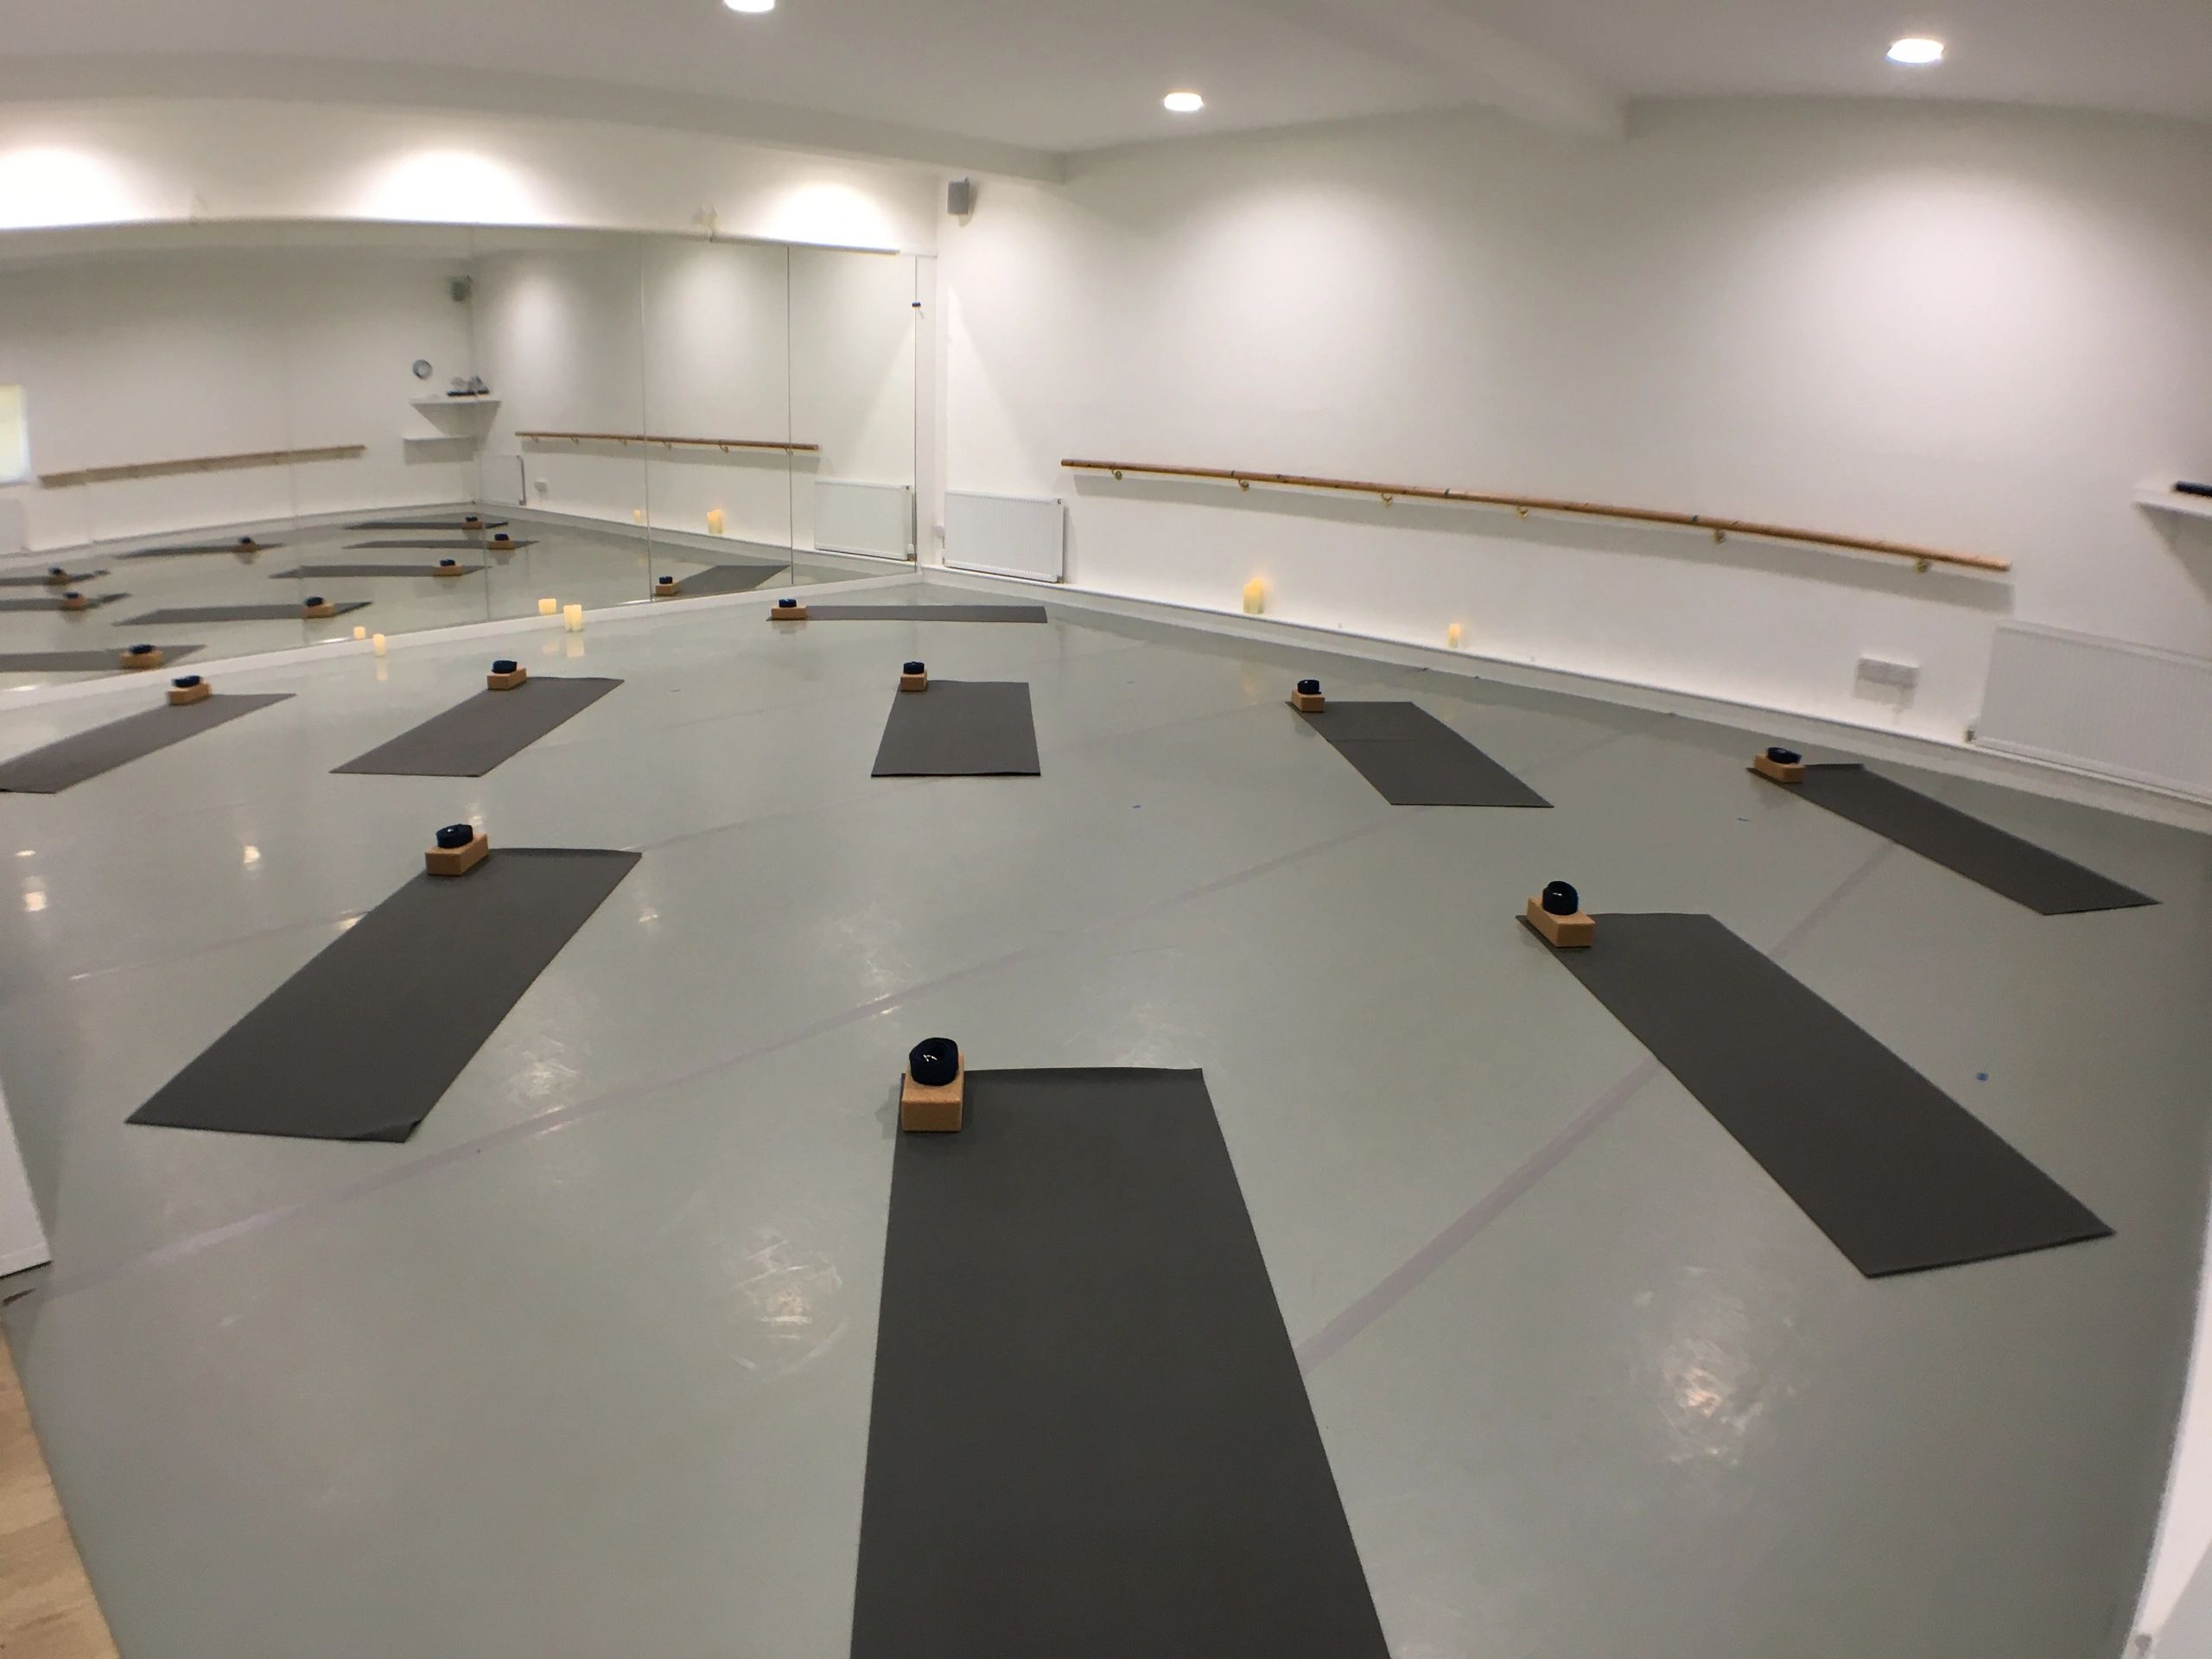 Yoga mats laid out in the yoga studio ready for a vinyasa yoga class, also known as Flow Yoga.